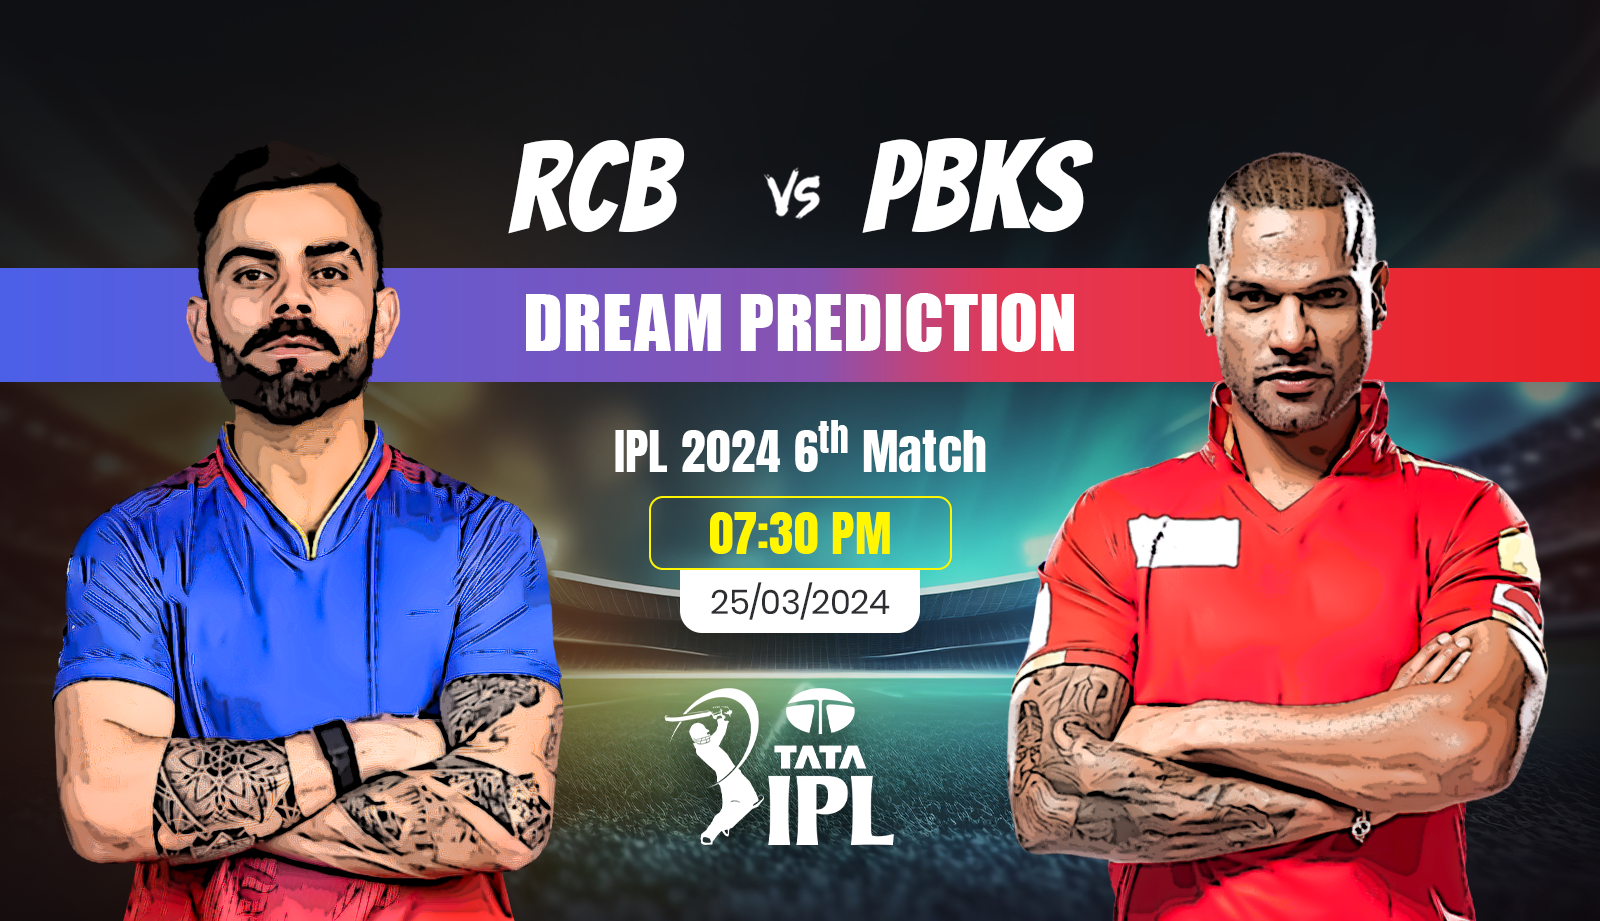 IPL-2024-RCB-vs-PBKS-Match-Prediction-and-Fantasy-tips-Playing-11s-Pitch-Report-Weather-Injury-Update-and-Head-to-Head-Record.jpg